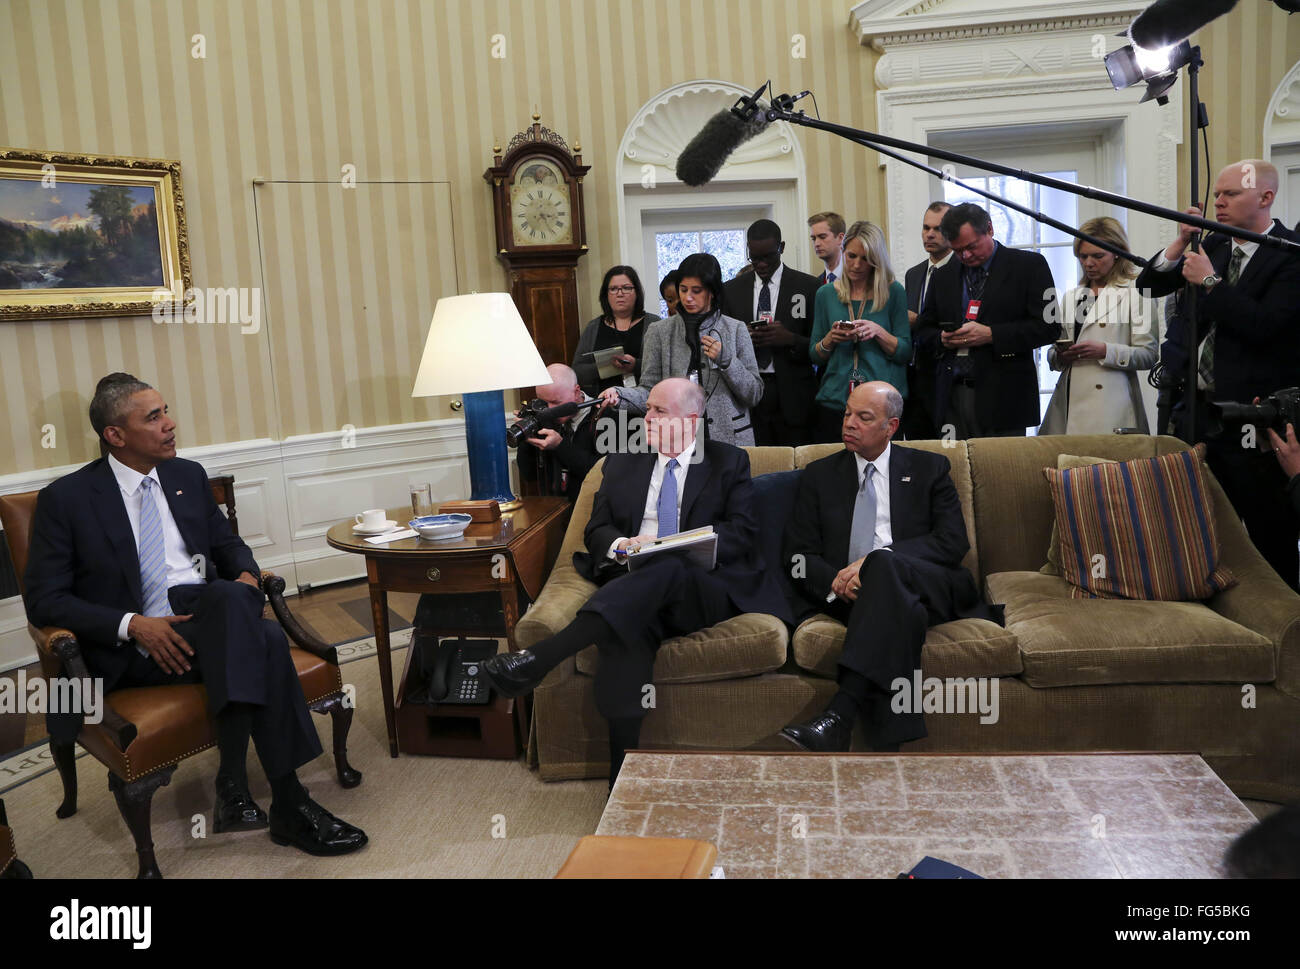 Washington DC, USA. 17th February, 2016.  United States President Barack Obama meets with former National Security Advisor Tom Donilon (C) and former IBM CEO Sam Palmisano (unseen), who are being appointed as the Chair and Vice Chair respectively of the Commission on Enhancing National Cybersecurity in the Oval Office of the White House, in Washington, DC, February 17, 2016. Also present during this meeting are Commerce Secretary Penny Pritzker (unseen) and Secretary of Homeland Security Jeh Johnson (R). Stock Photo